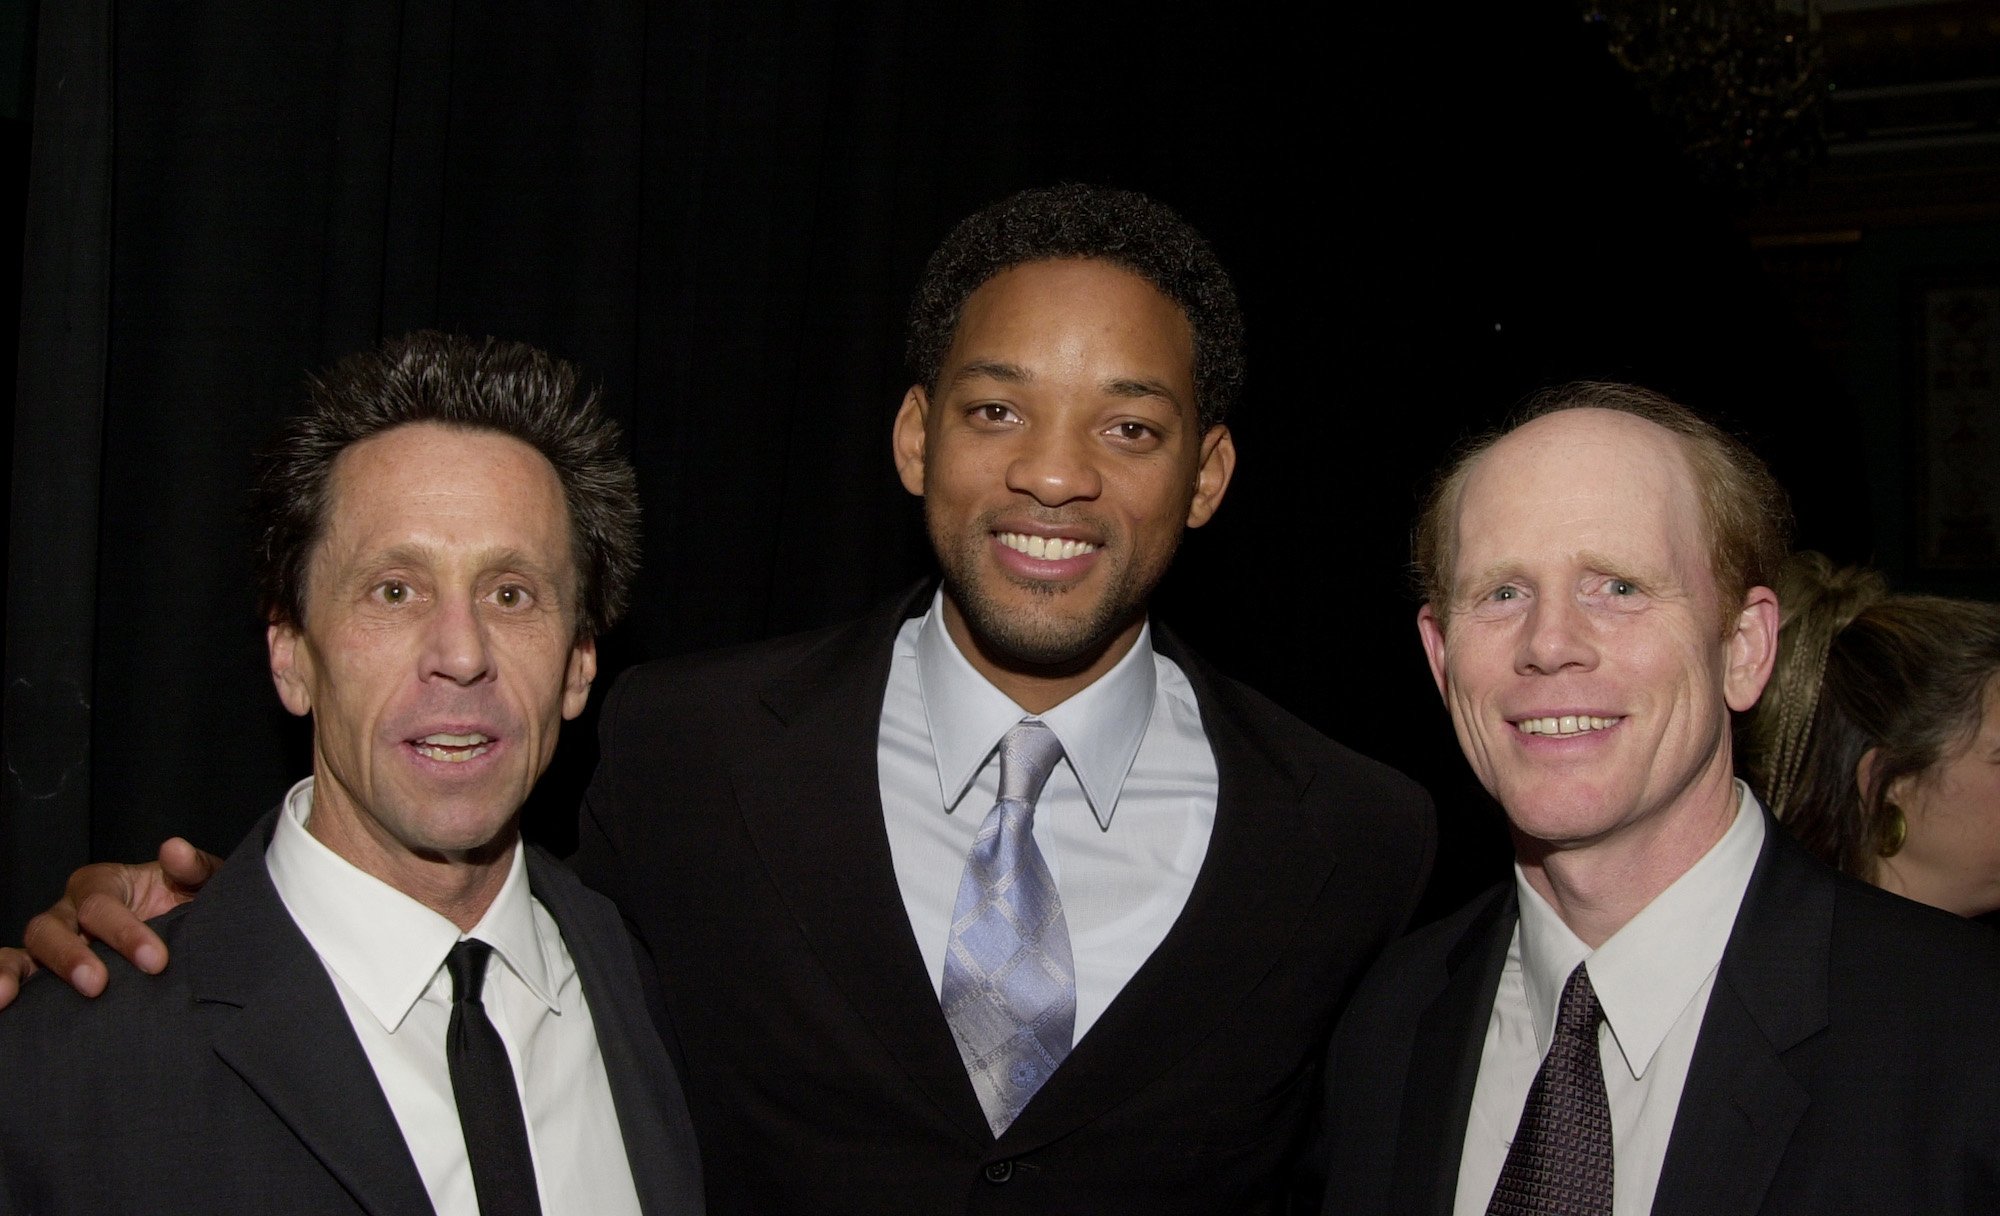 Will Smith Chris Rock Slap: Ron Howard Expects Academy ‘Will Be Very, Very Thoughtful’ in Review